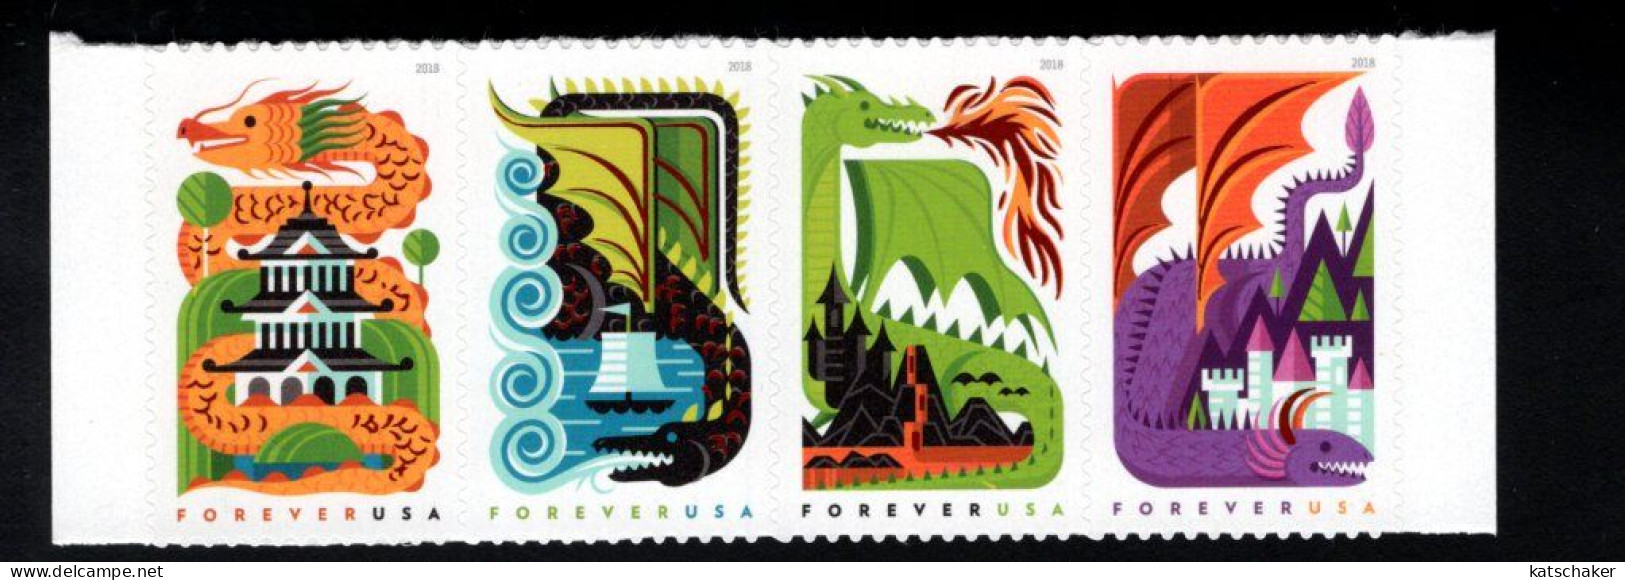 1850632674 2018 SCOTT 5310A (XX)  POSTFRIS MINT  NEVER HINGED  -  DRAGONS - Unused Stamps